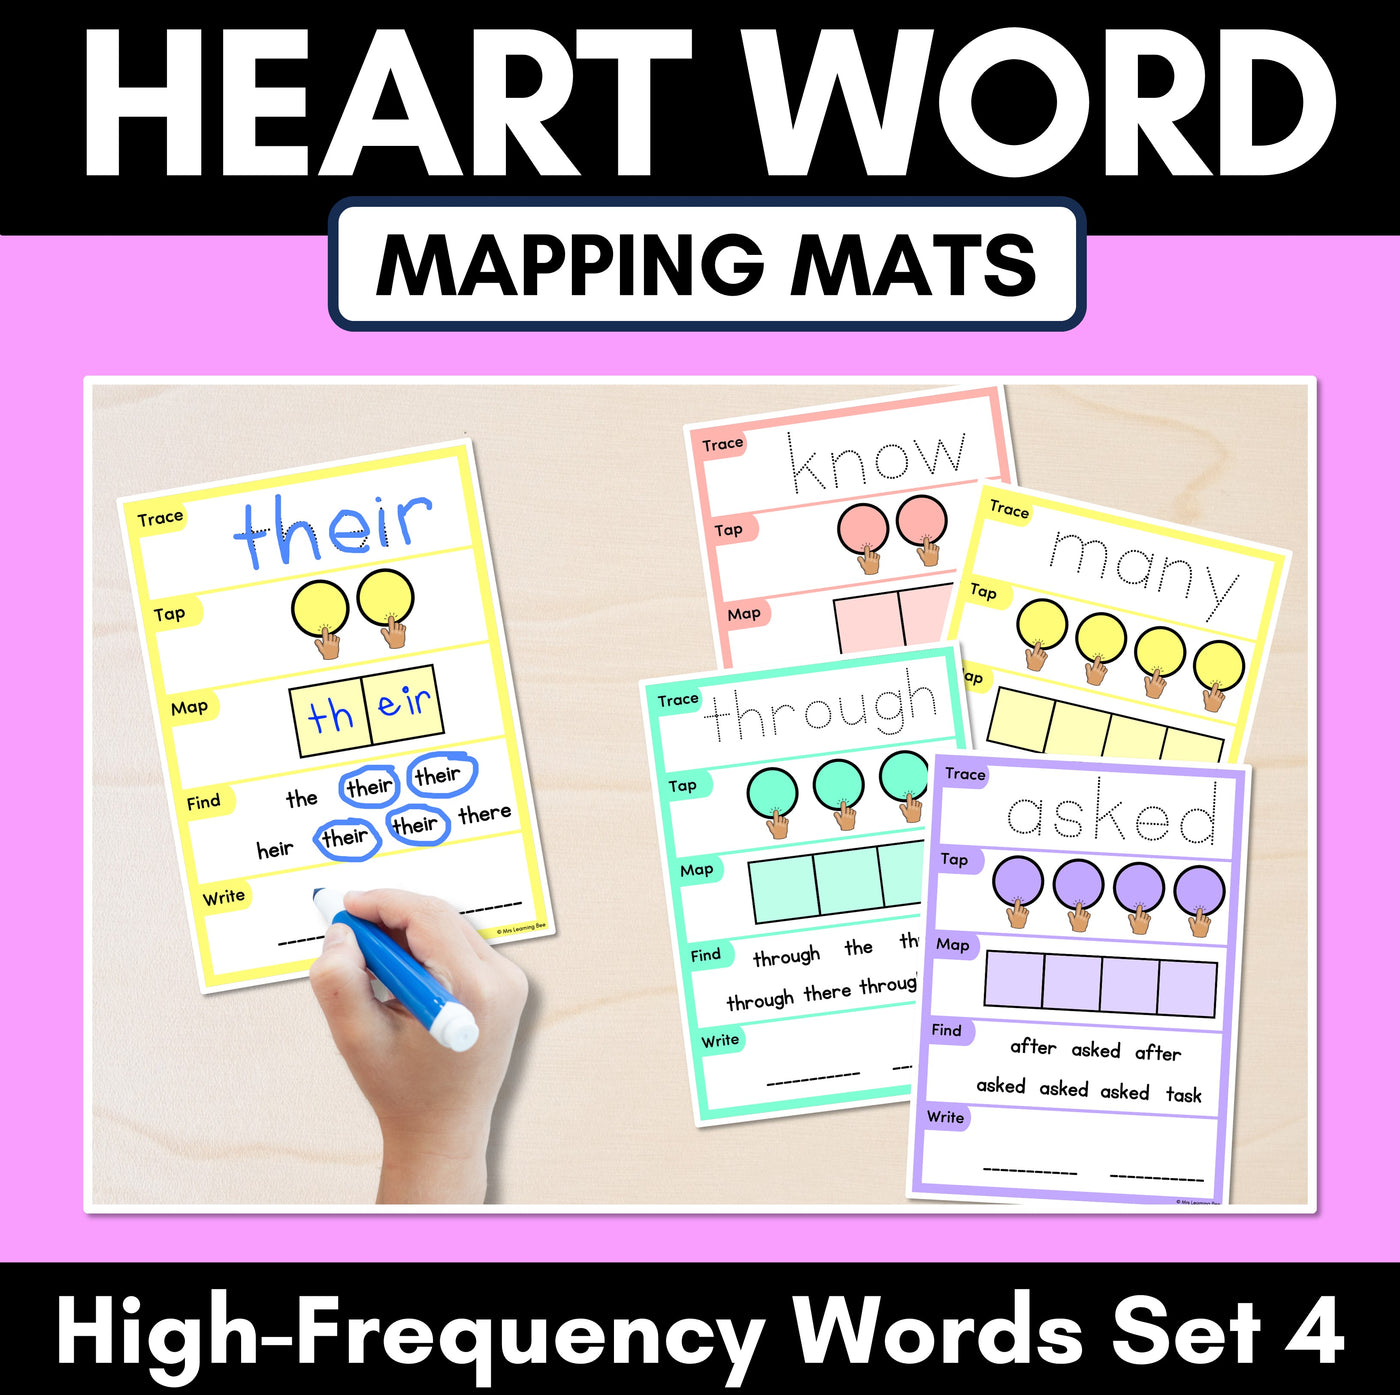 HEART WORD MAPPING MATS - High-Frequency Words Set 4